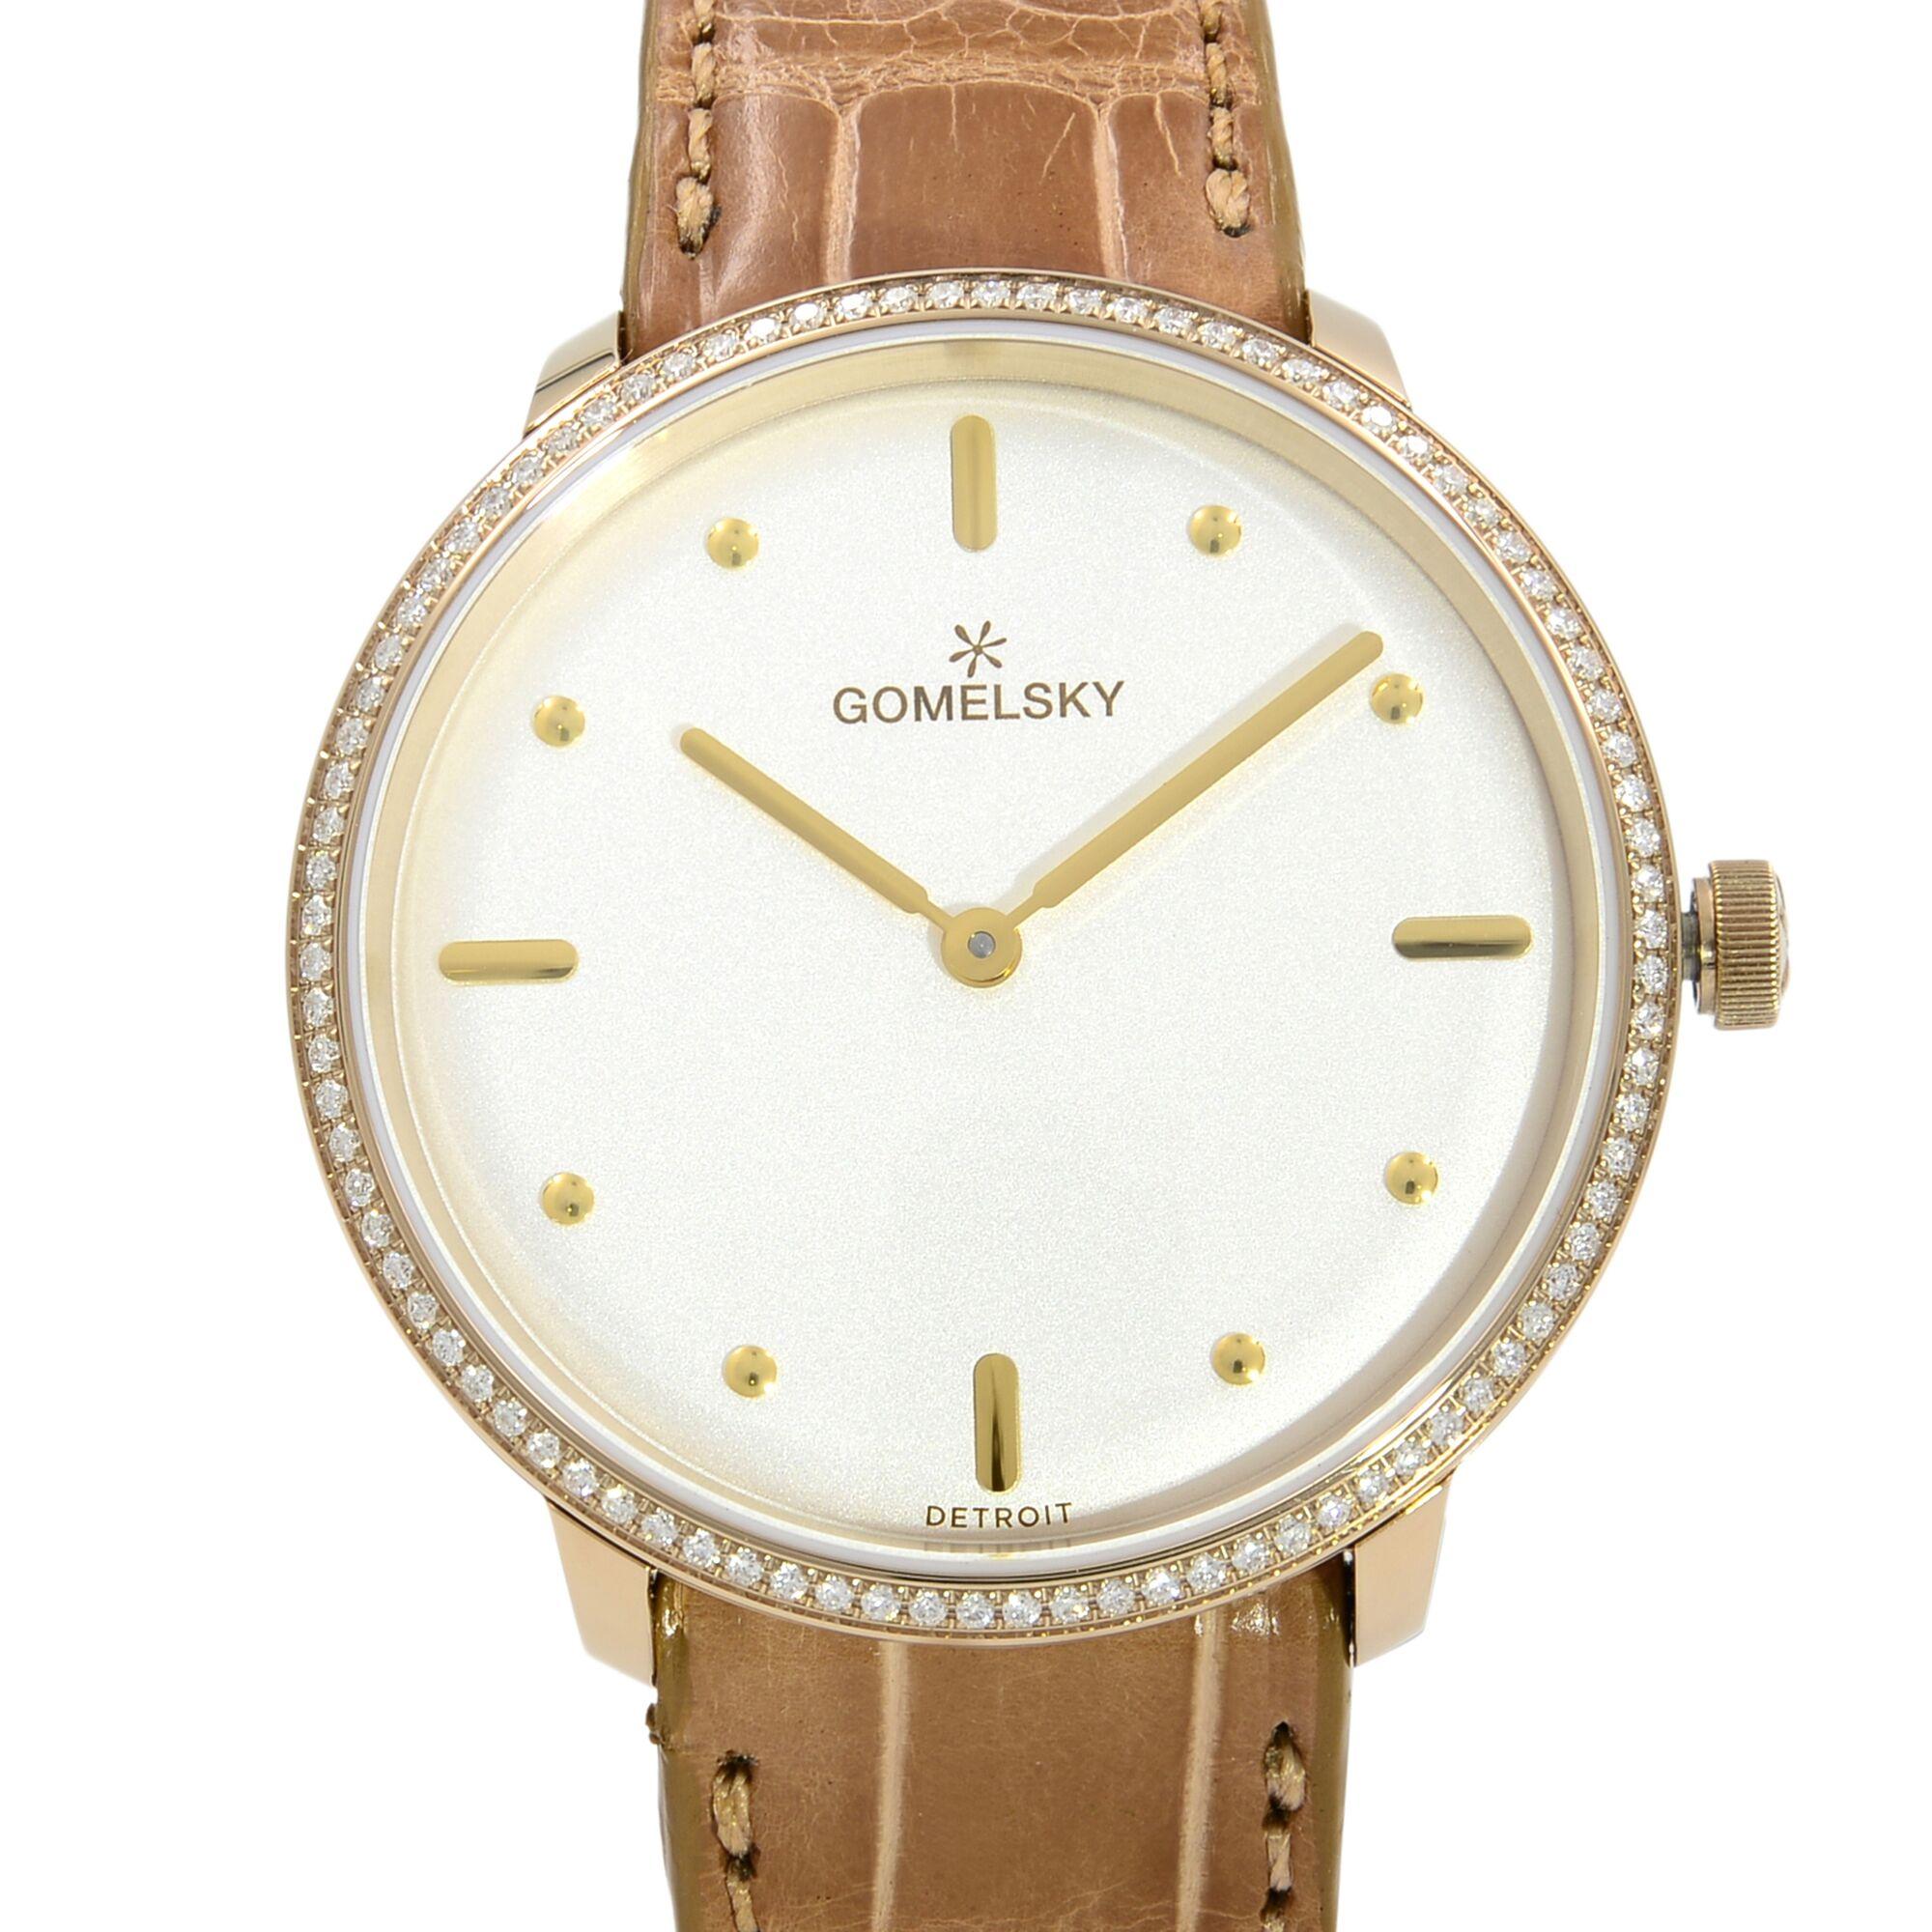 Brand	Gomelsky by Shinola
Series	Audry
Model Number	G0120112280
Seller Warranty Provided
Movement	Quartz: Battery
Gender	Ladies
Case Material	Stainless Steel
Case Shape	Round
Case Diameter w/ crown	39mm
Case Diameter	36mm
Bezel Diameter	36mm
Case